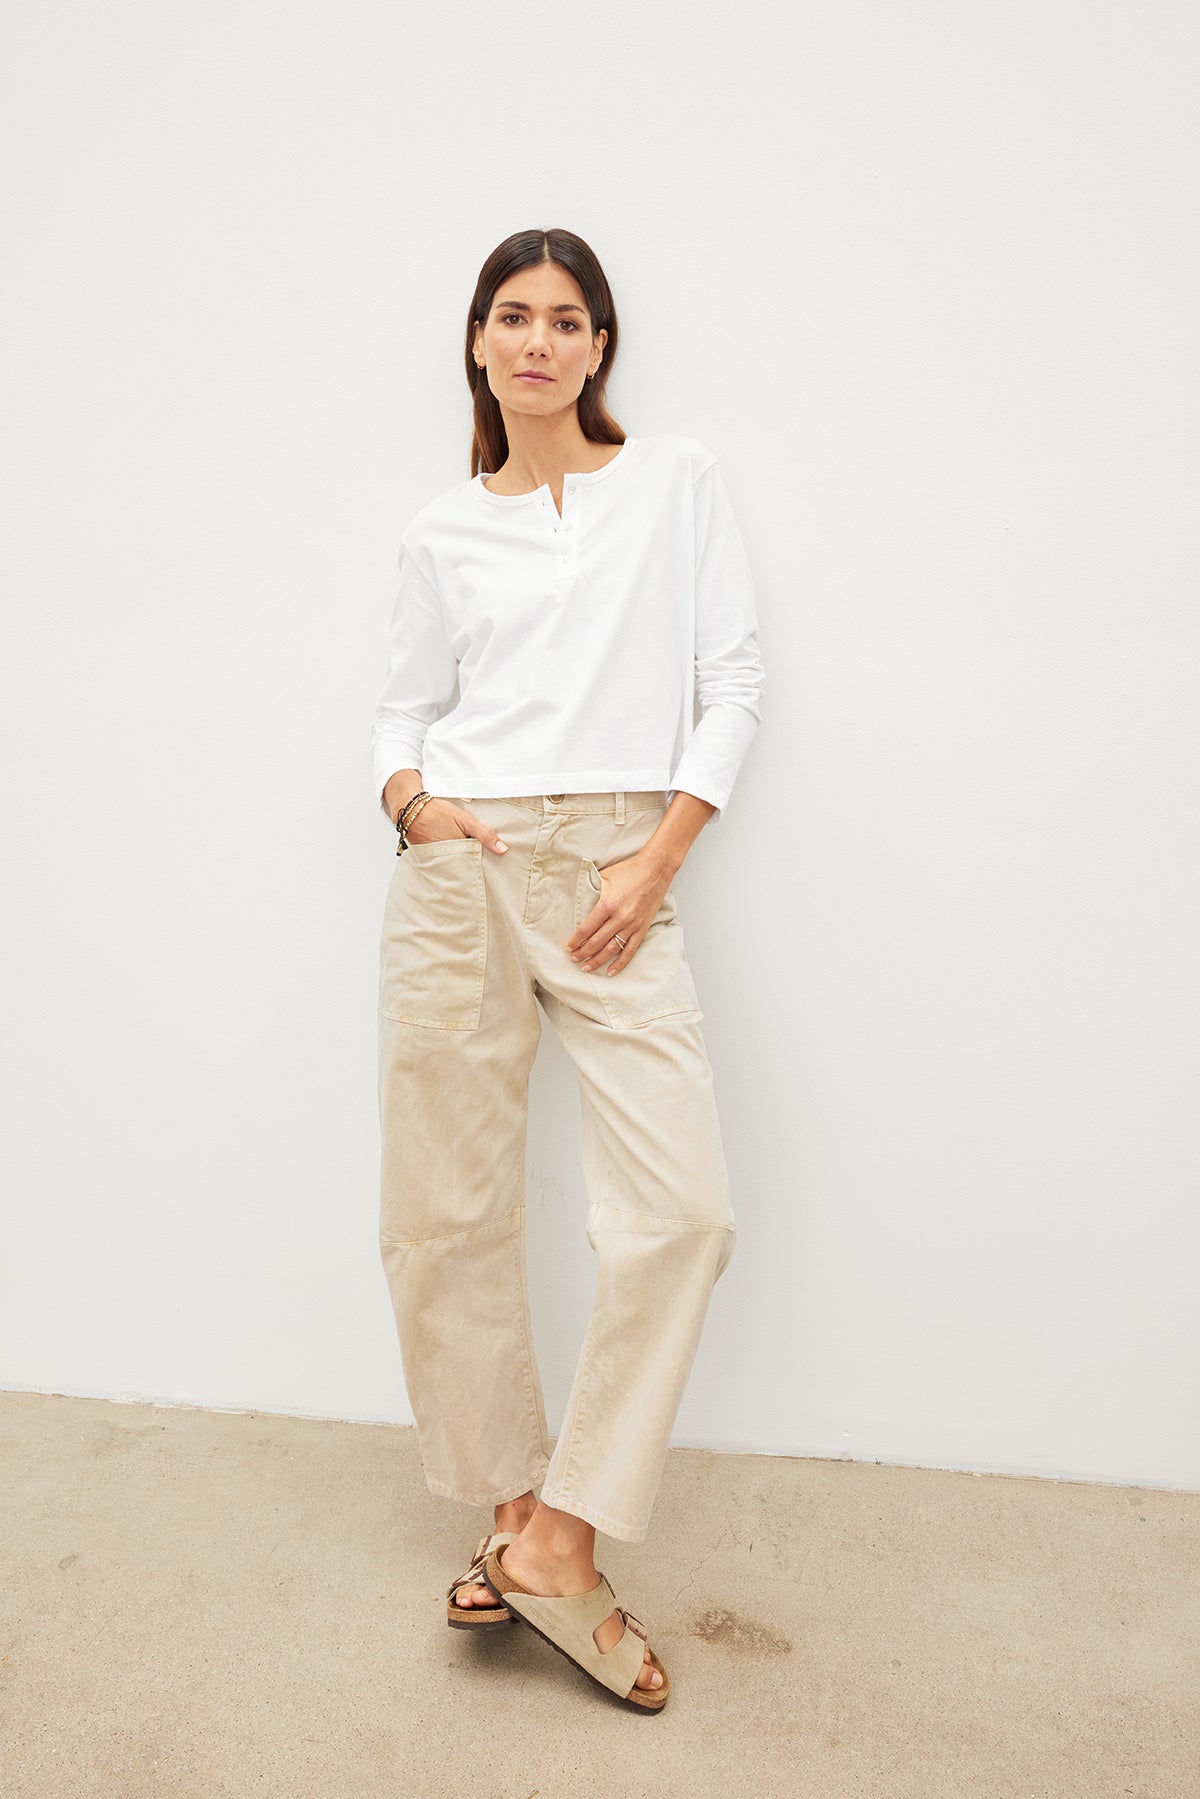   A woman wearing a DELIAH CROPPED HENLEY shirt by Velvet by Graham & Spencer and beige pants in her everyday wardrobe. 